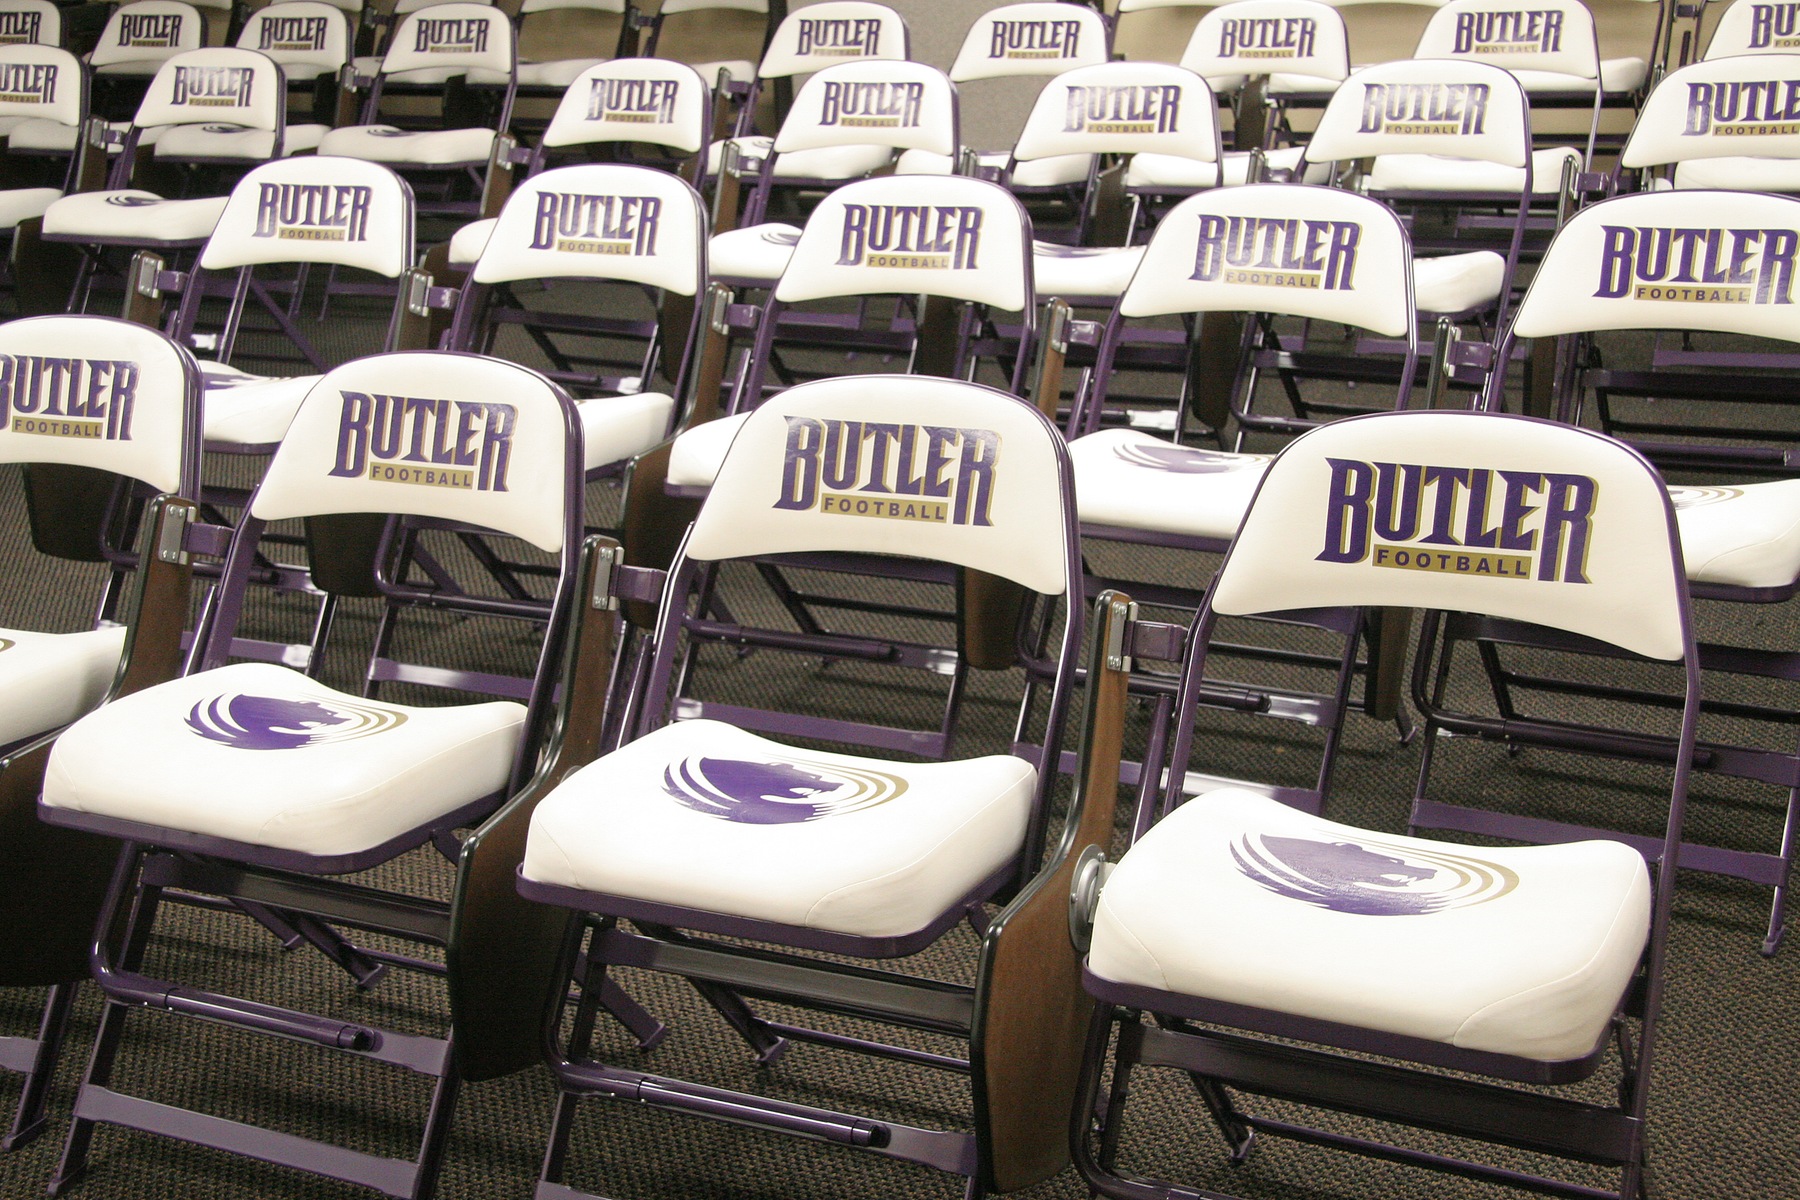 Padded football chairs for players for team meetings